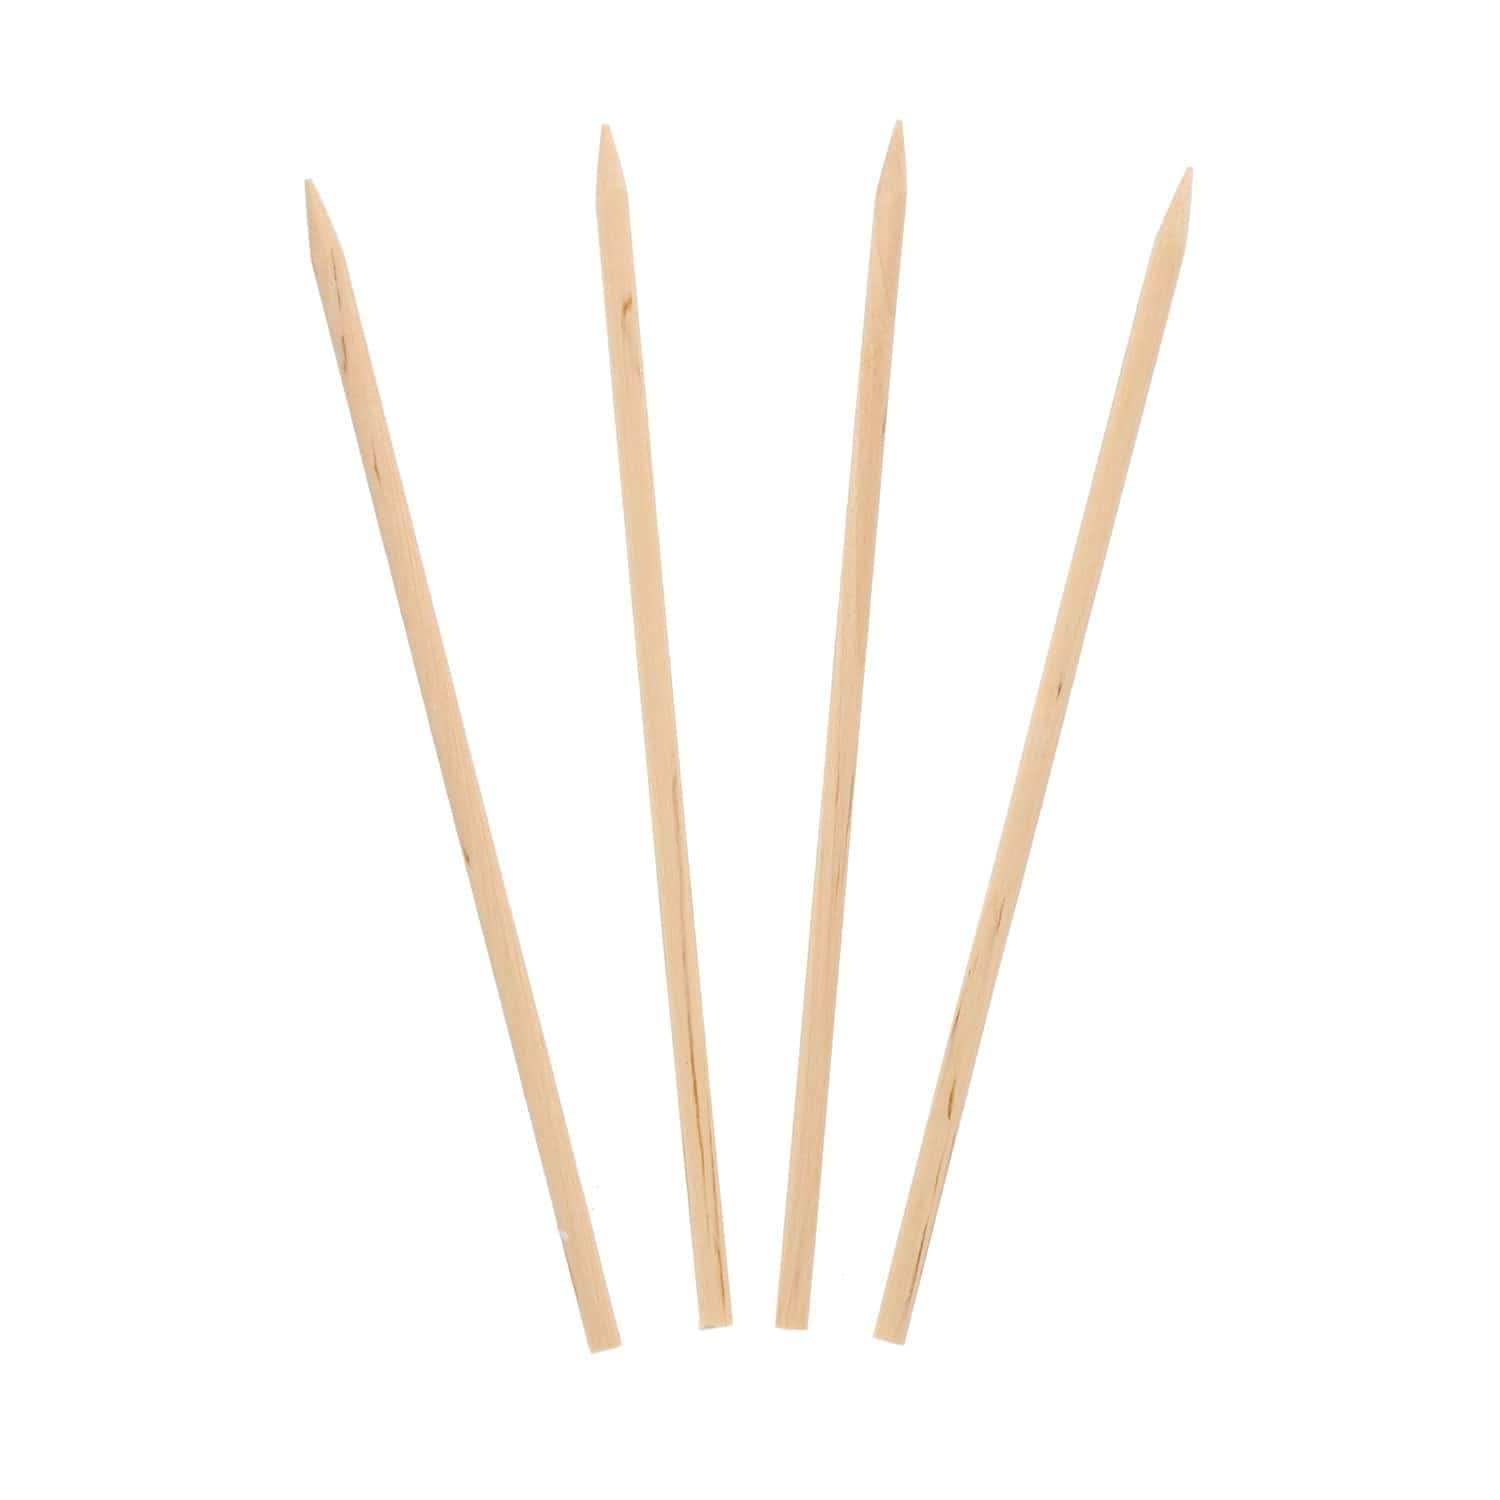 Royal 5.5 Bamboo Coffee Stirrer, Package of 10,000